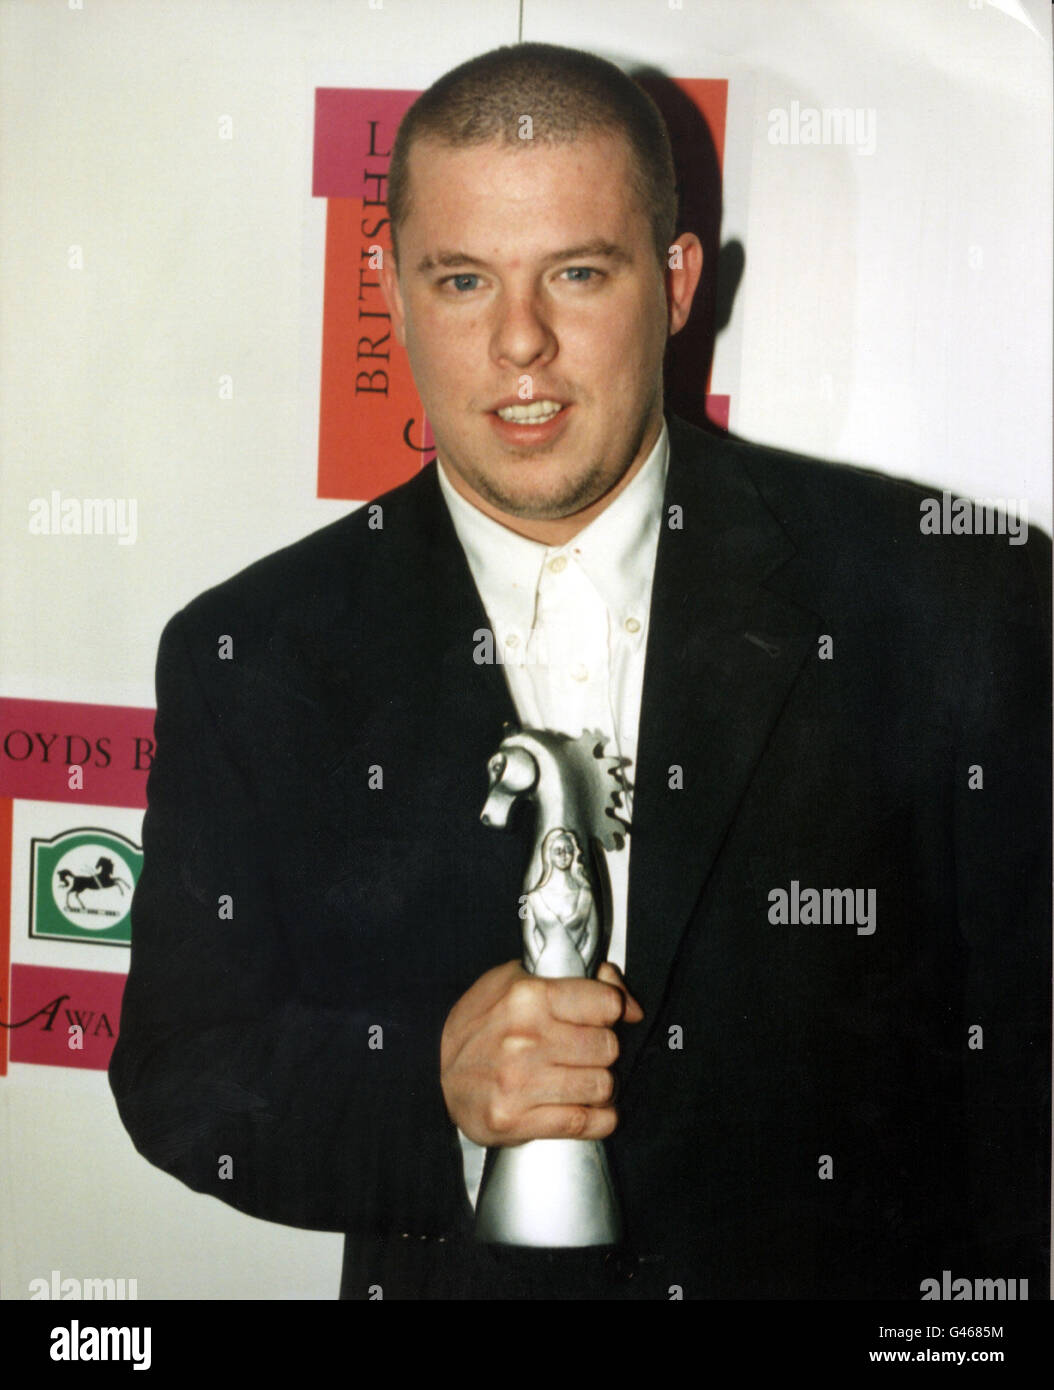 LONDON FASHION AWARDS : 22/10/96 : ALEXANDER MCQUEEN WITH HIS BRITISH ...